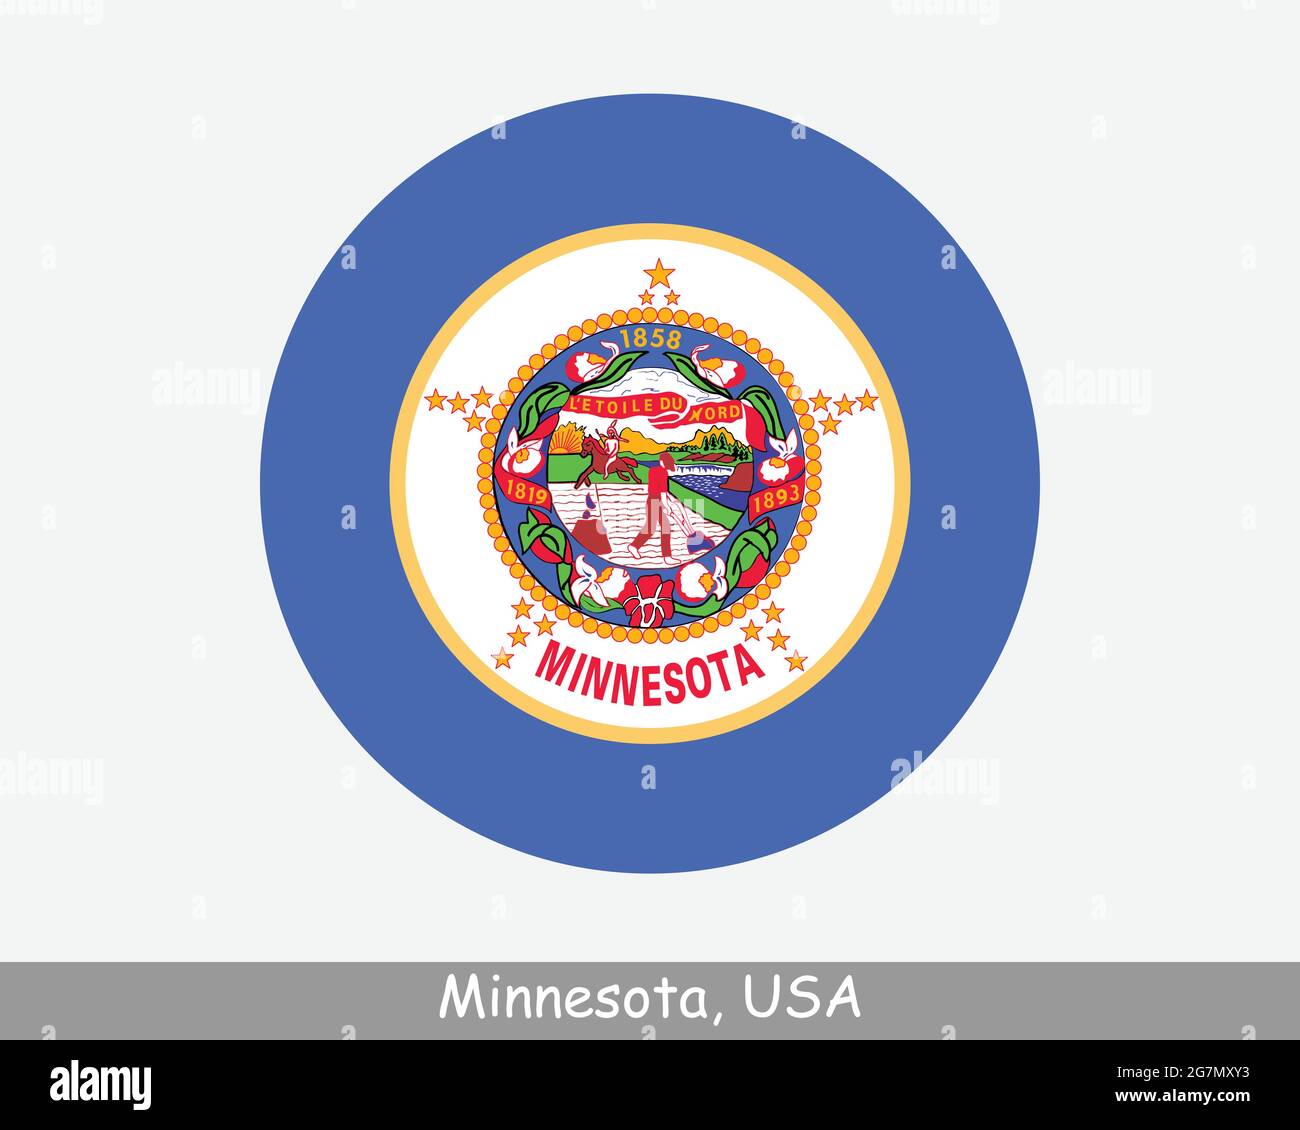 Minnesota Round Circle Flag. MN USA State Circular Button Banner Icon. Minnesota United States of America State Flag. Land of 10,000 Lakes, North Star Stock Vector